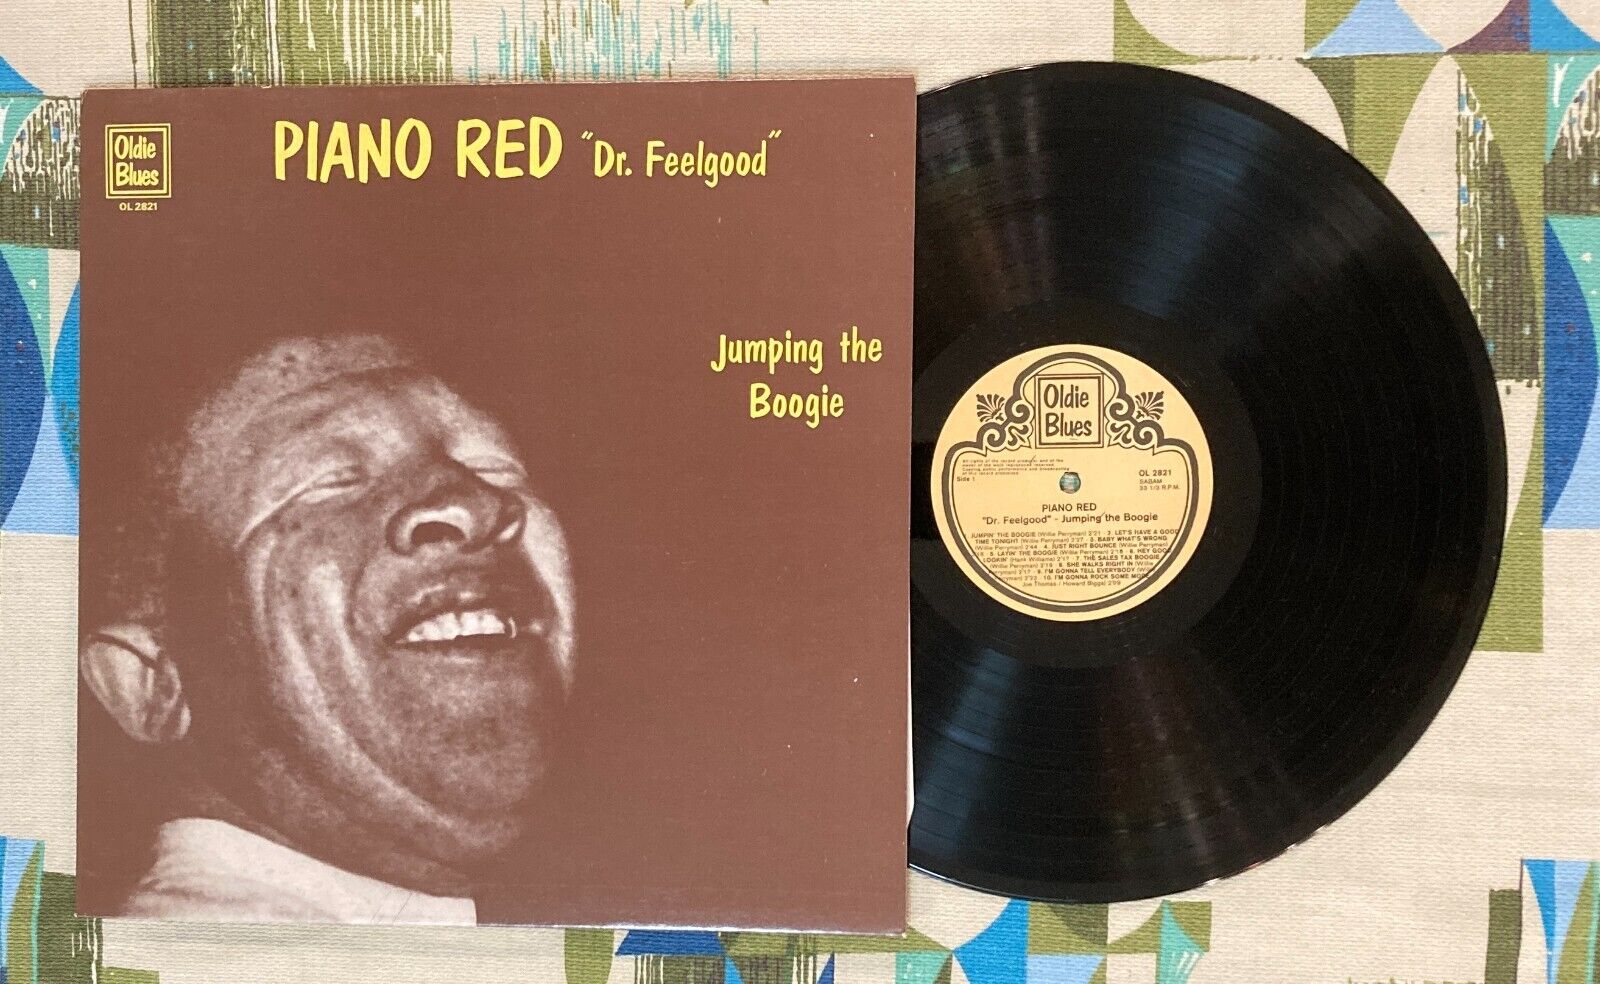 Piano Red aka Dr. Feelgood LP Jumping the Boogie 1950-1955 VG++/M-